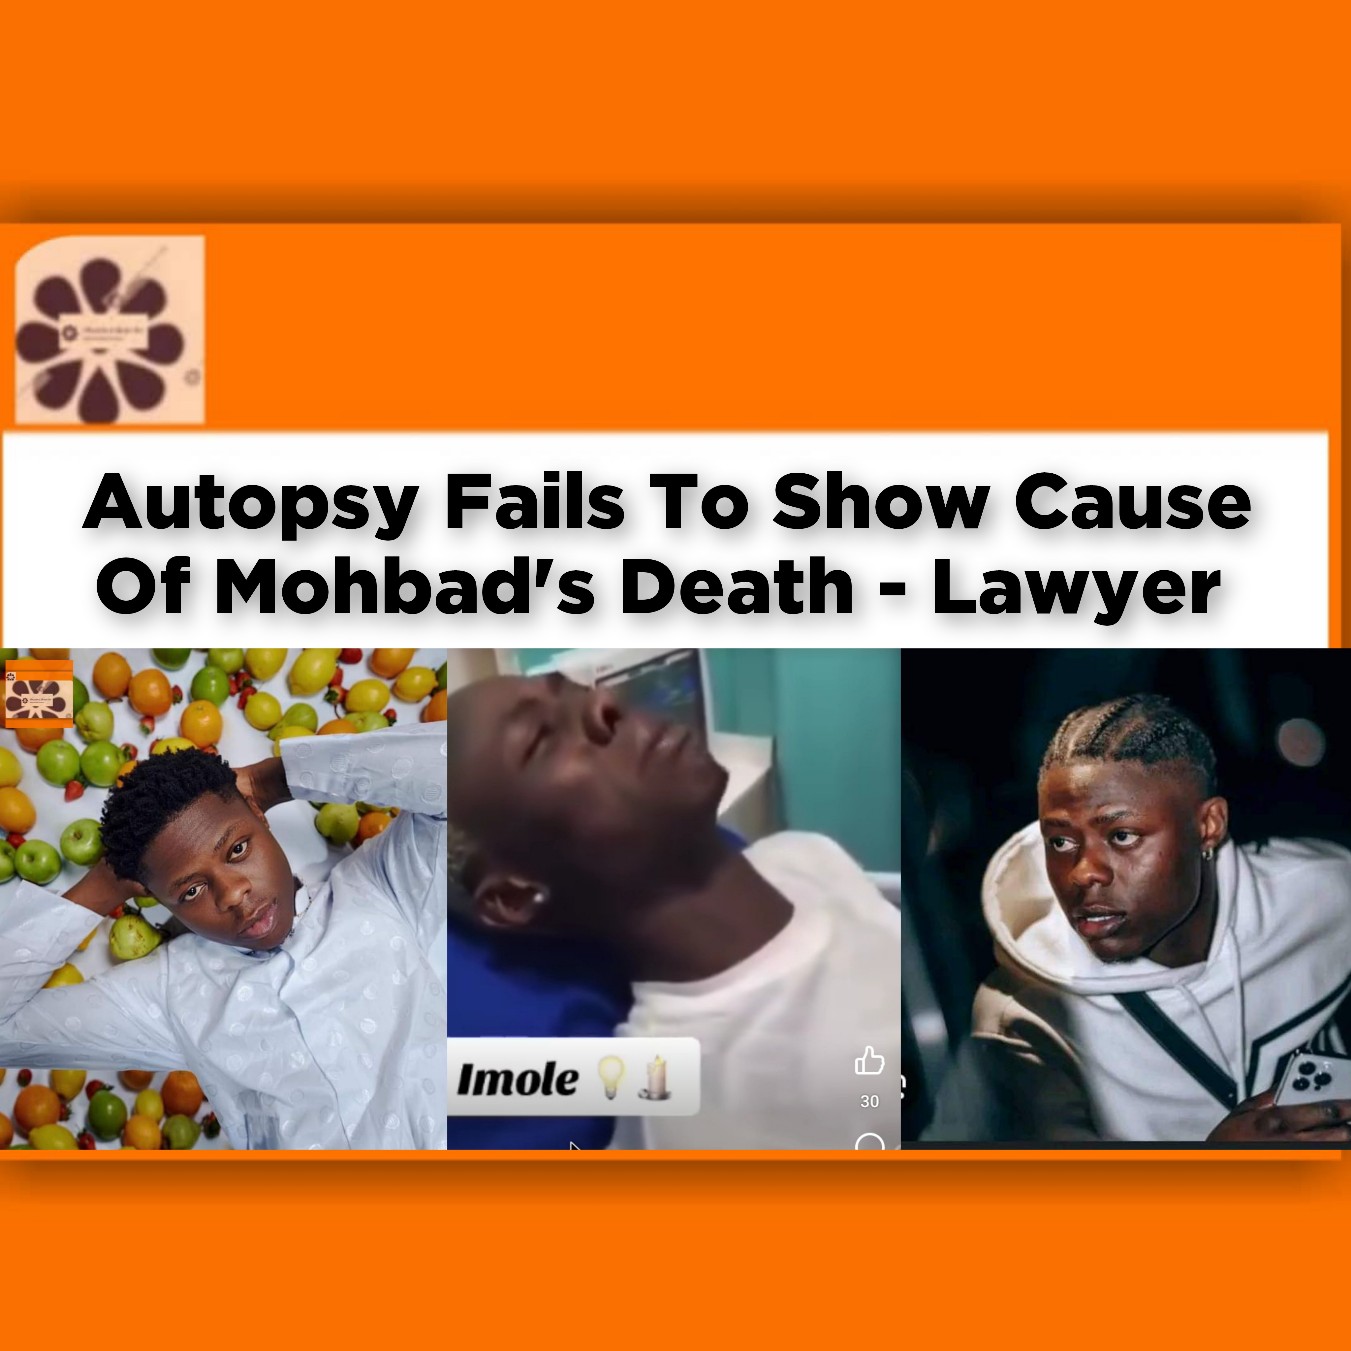 Autopsy Fails To Show Cause Of Mohbad's Death - Lawyer ~ OsazuwaAkonedo #PEPC